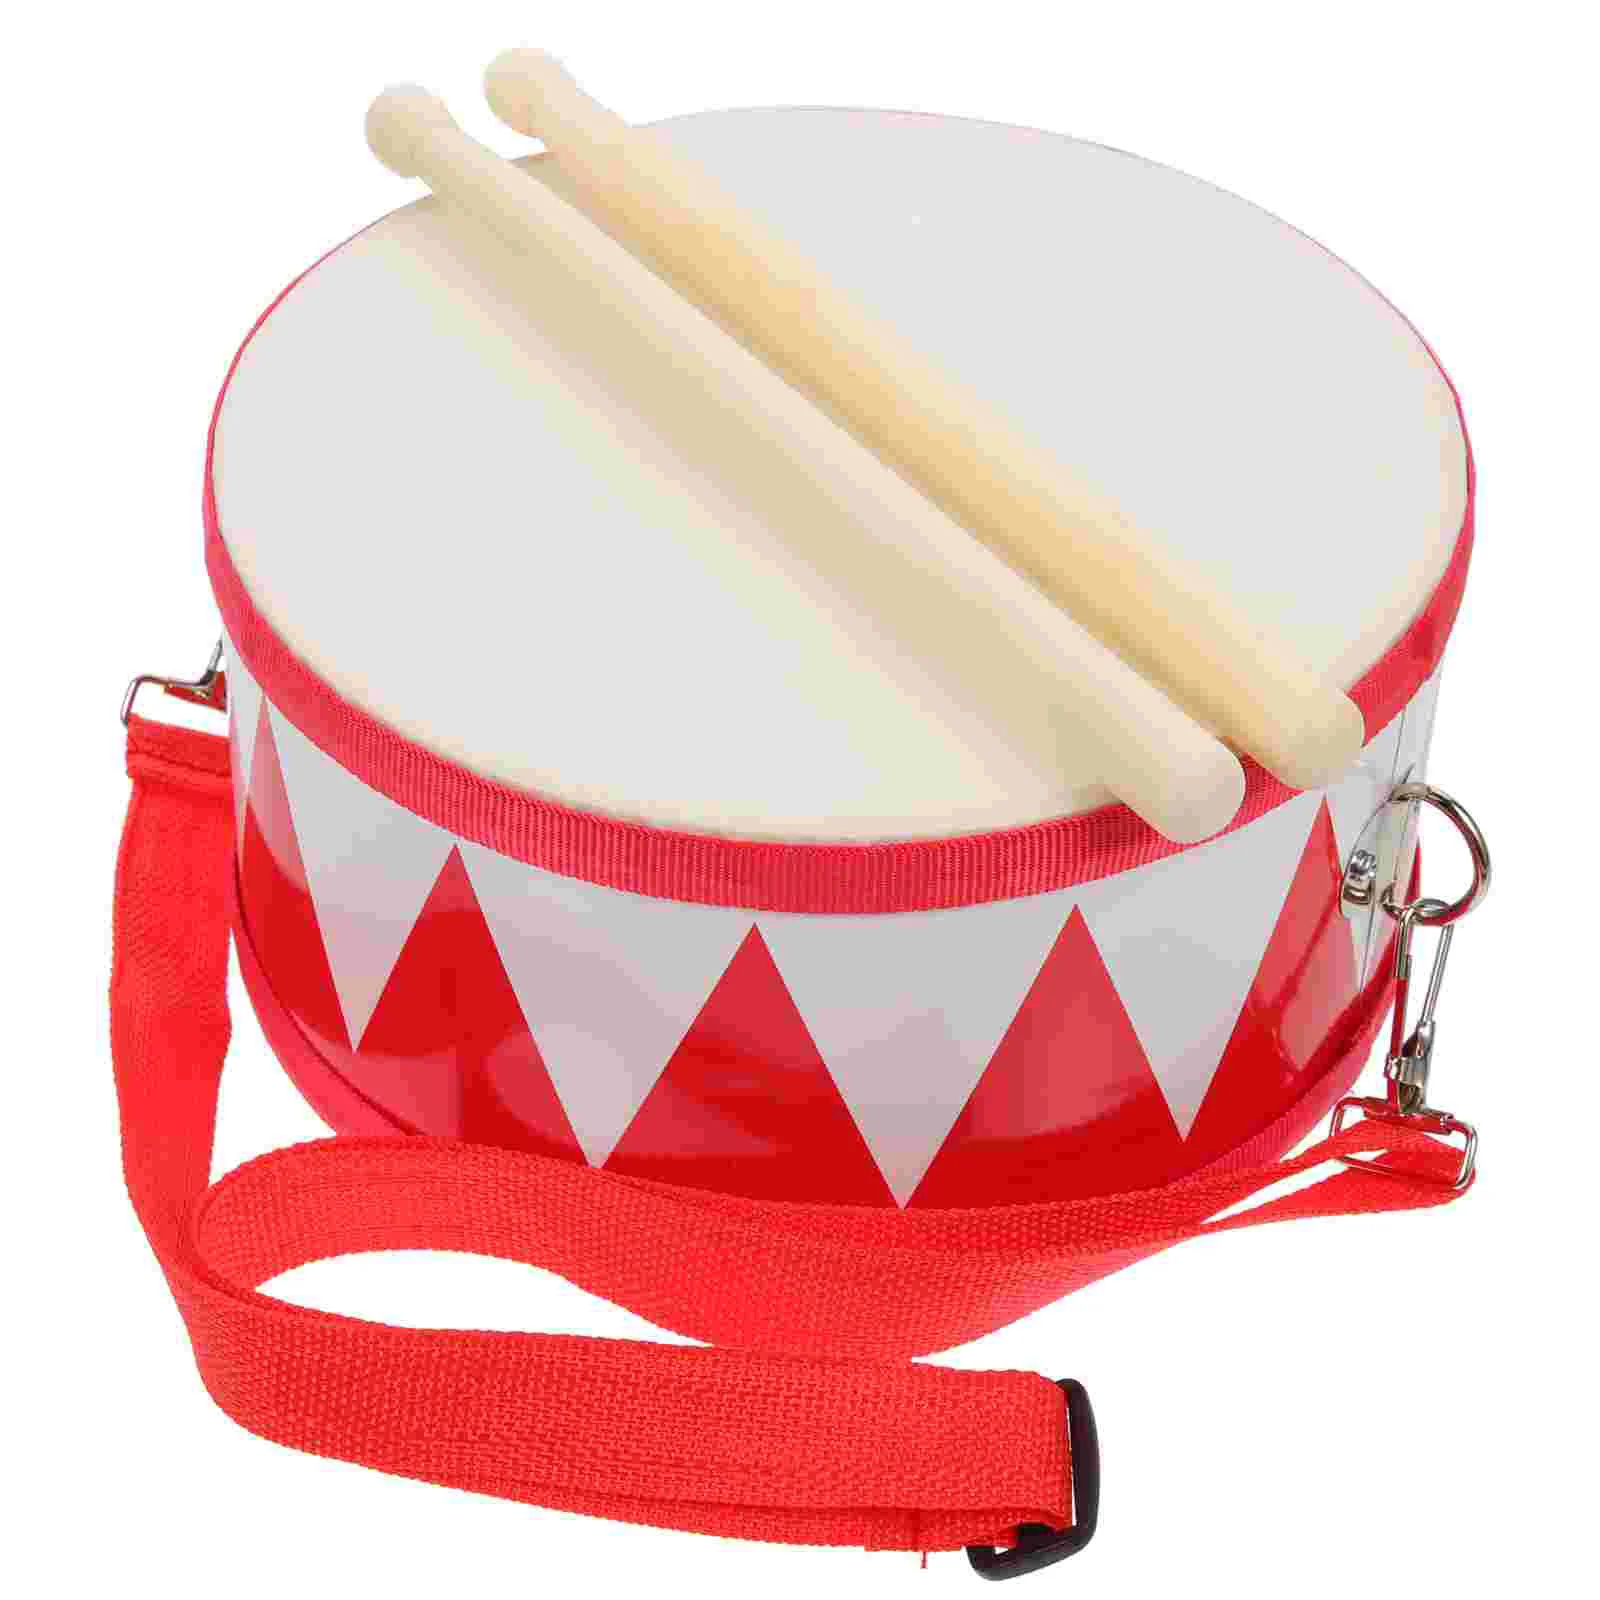 

Kids Wooden Toys Children's Snare Drum Plaything Percussion Musical Instrument Toddler Education